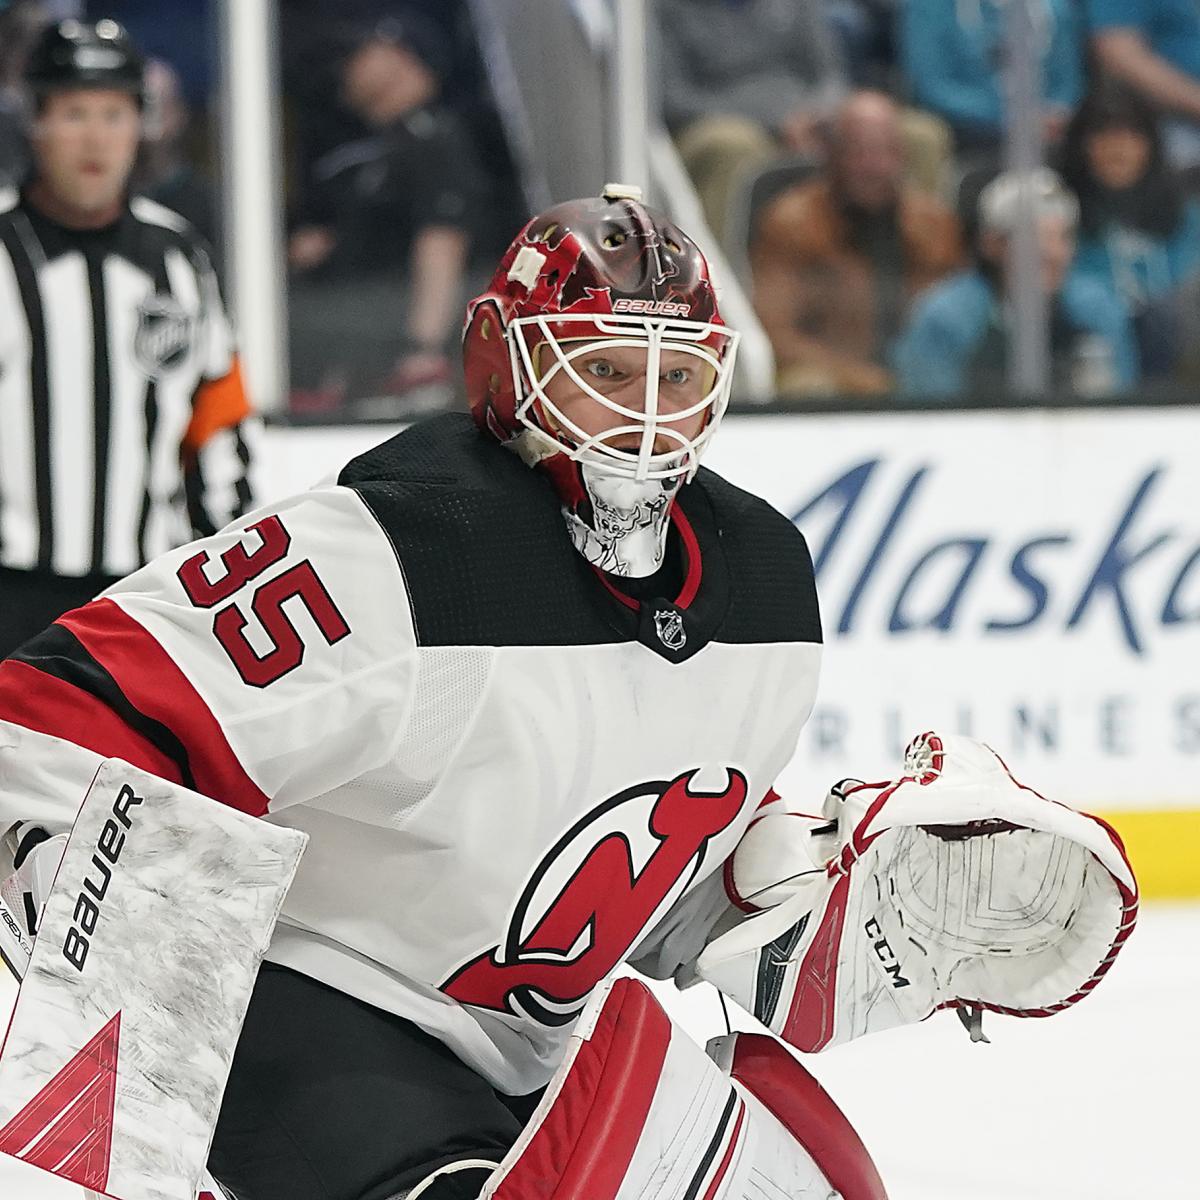 Cory Schneider and the Devils AHL Backup Squad Shut out the Senators 4-0 -  All About The Jersey